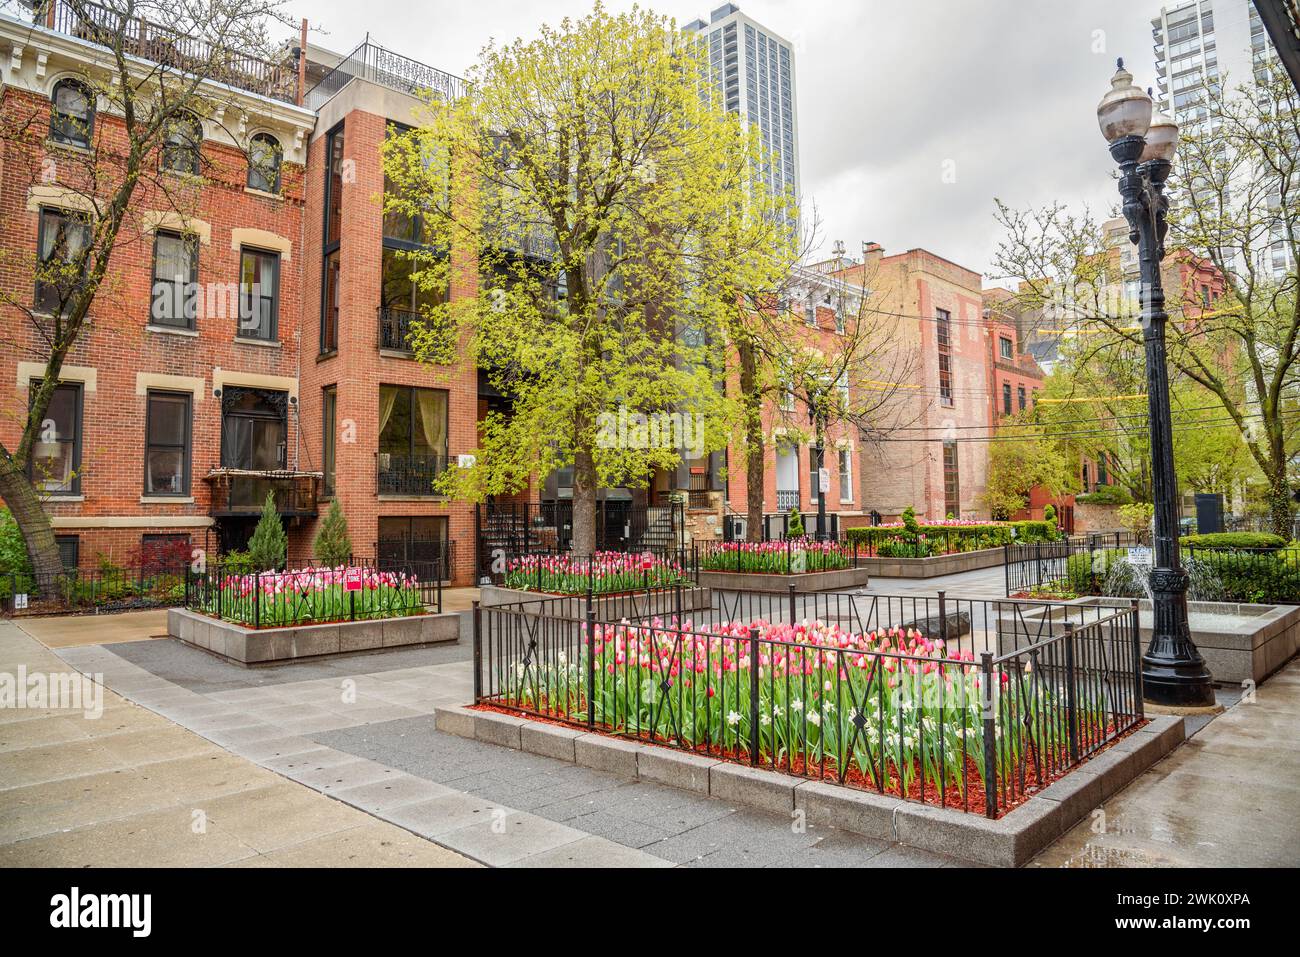 Small square with flower beds and a fountain surrounded by brick residentail buildings in old town Chicago on a cloudy spring day Stock Photo